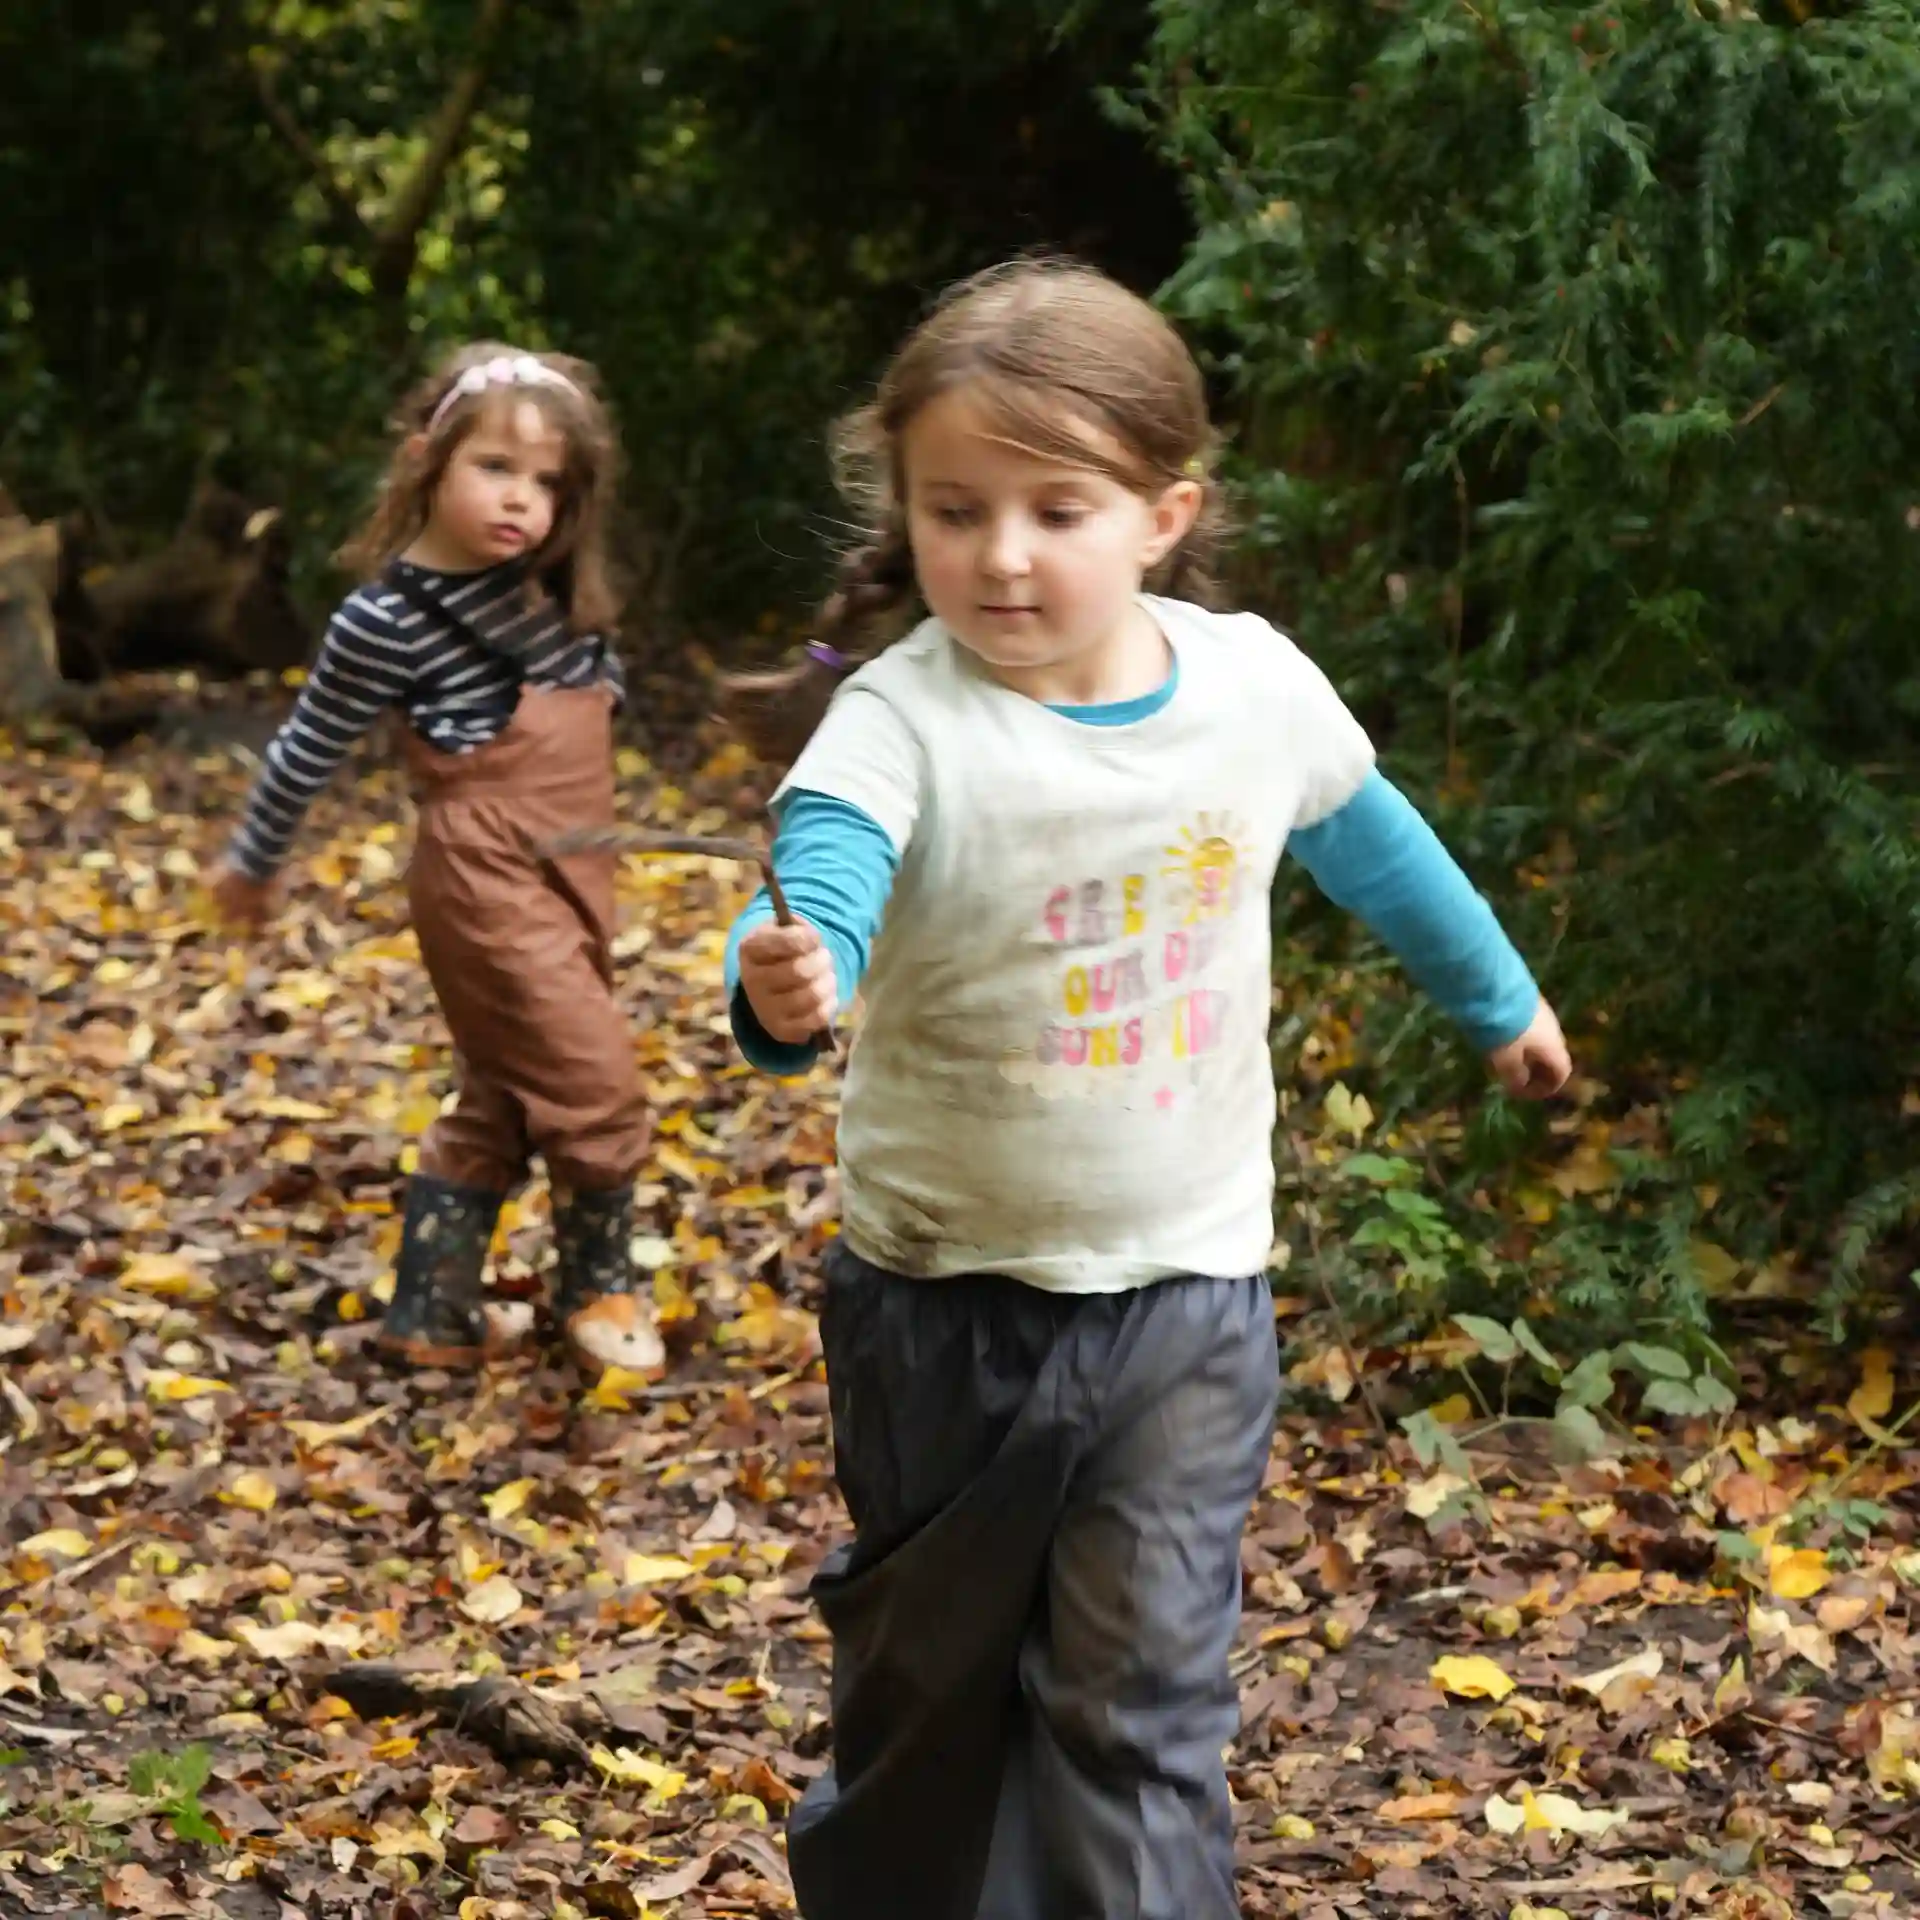 Two children running through the forest playing with sticks.